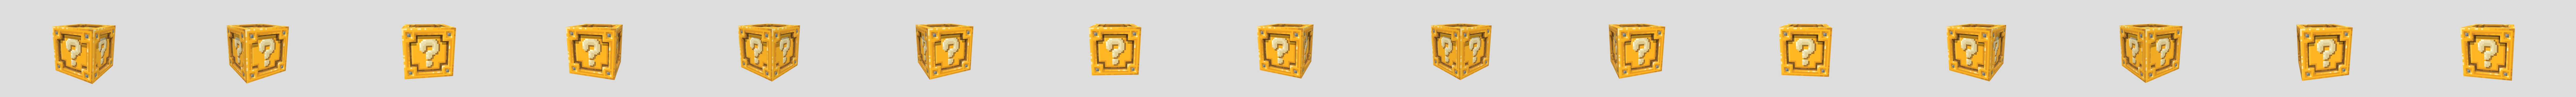 LUCKY BLOCK - Download Free 3D model by DURVESH S (@durvesh123) [6a74c31]